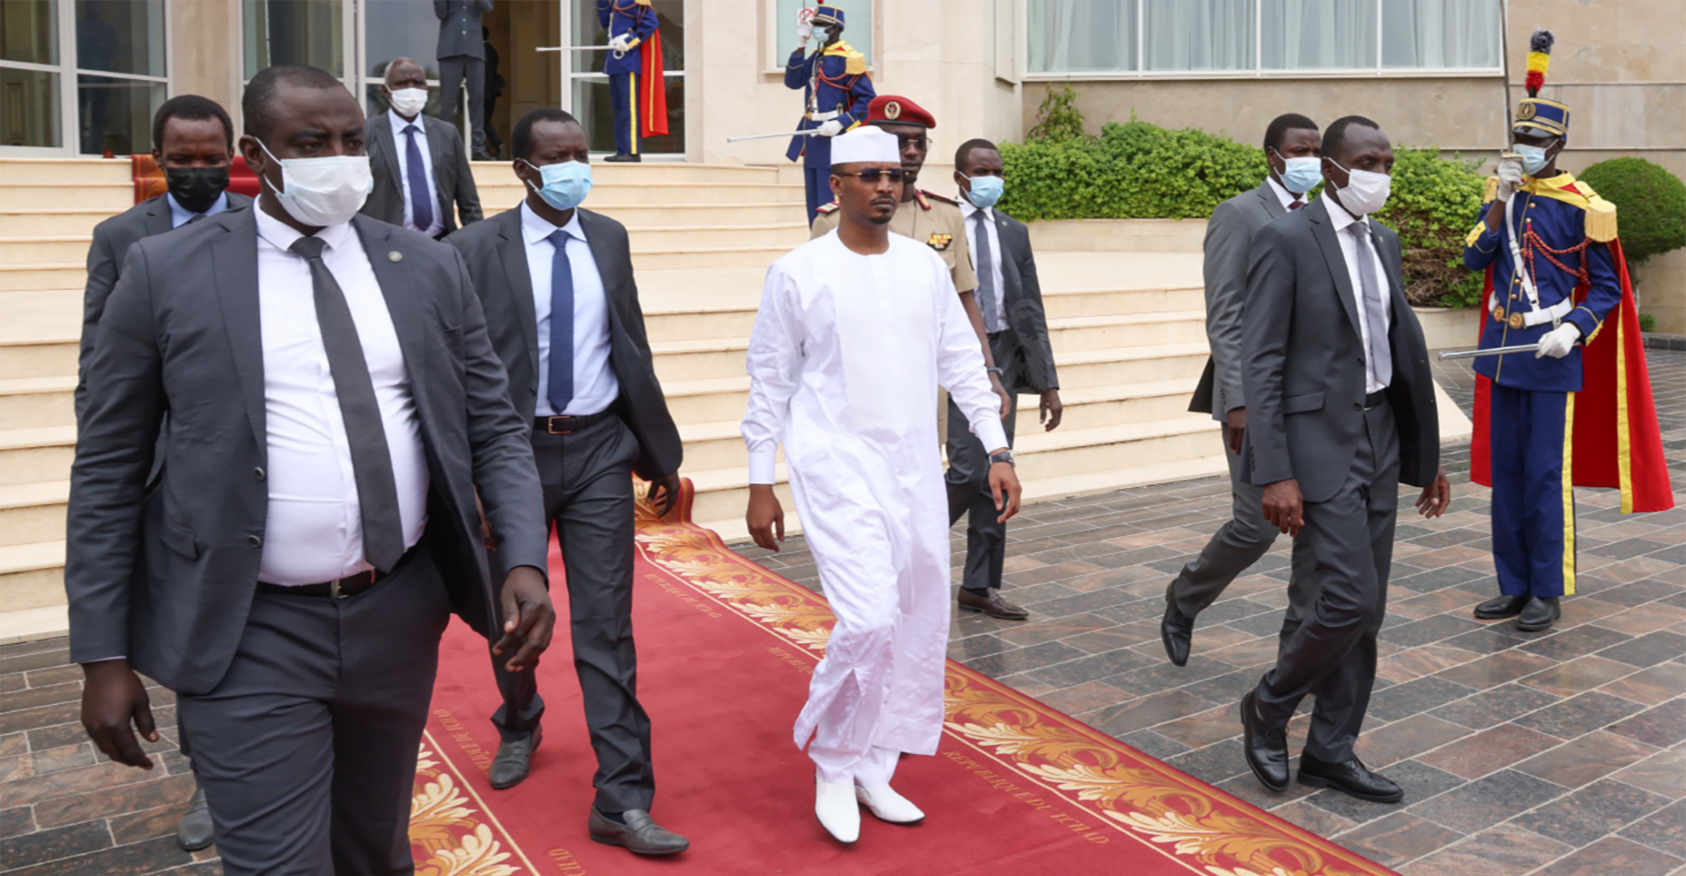 Mahamat Idriss Déby, Chadian president and head of the country’s Transitional Military Council, in N’Djamena, Chad. July 18, 2022. (André Kodmadjingar – VOA / Wikimedia Commons)